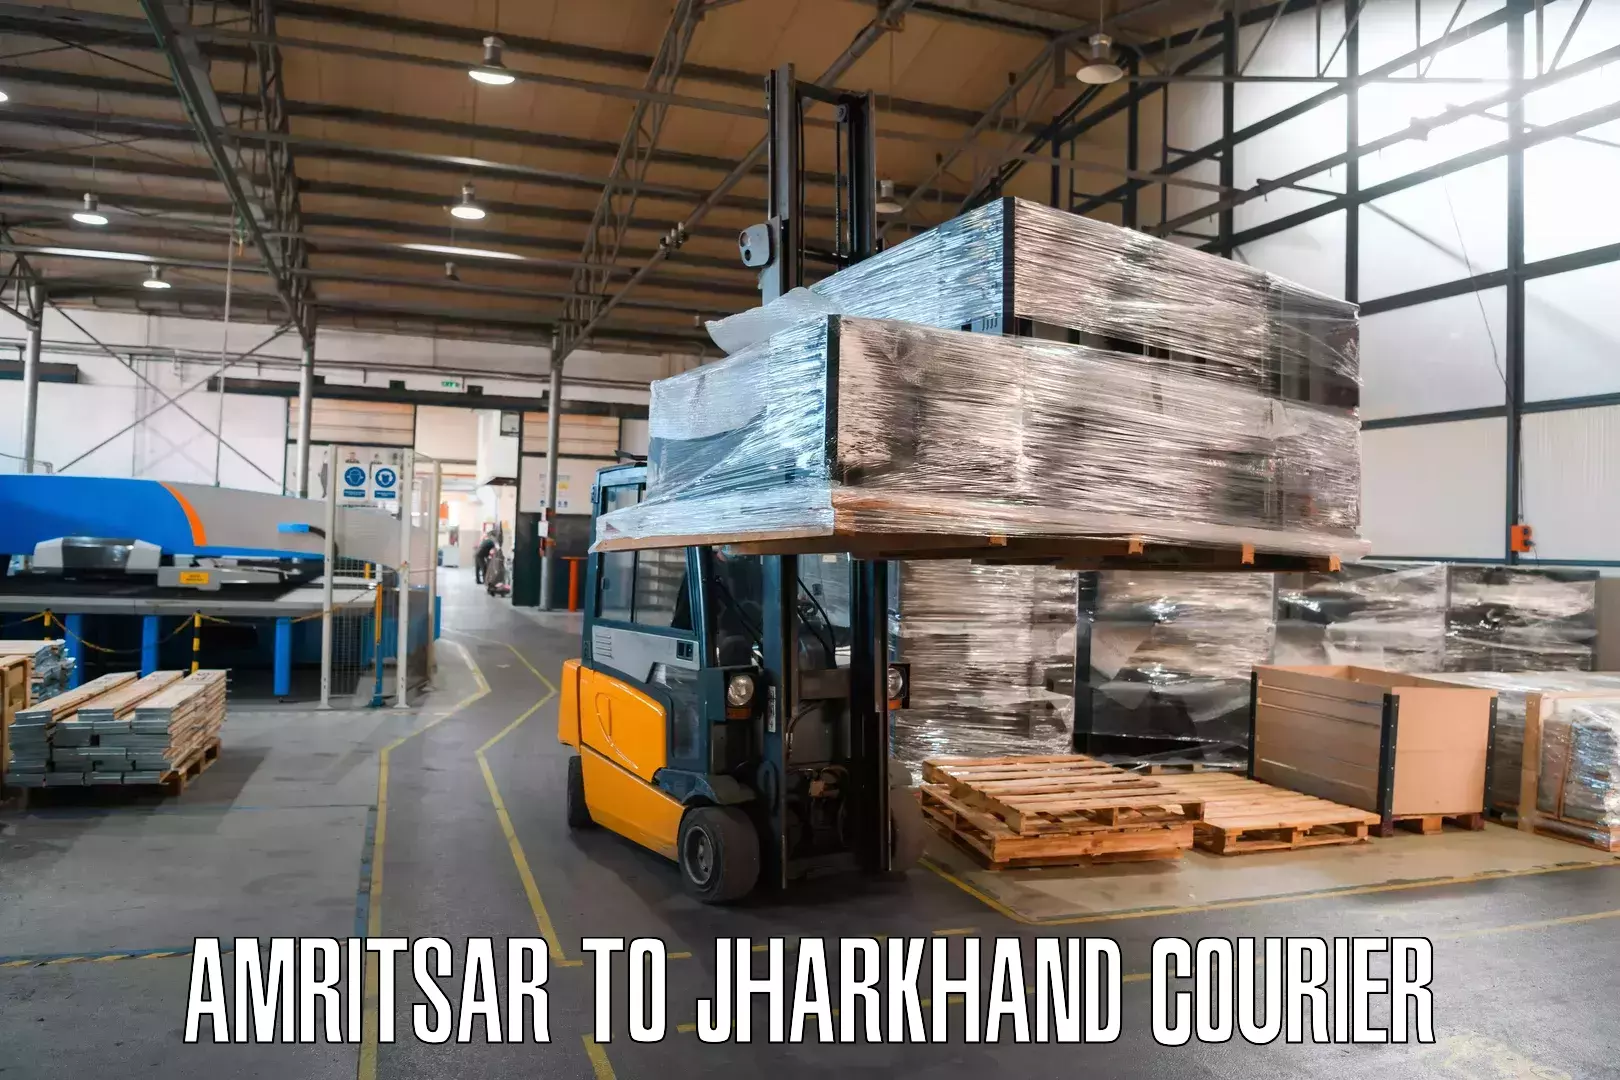 Express courier capabilities Amritsar to Dhanbad